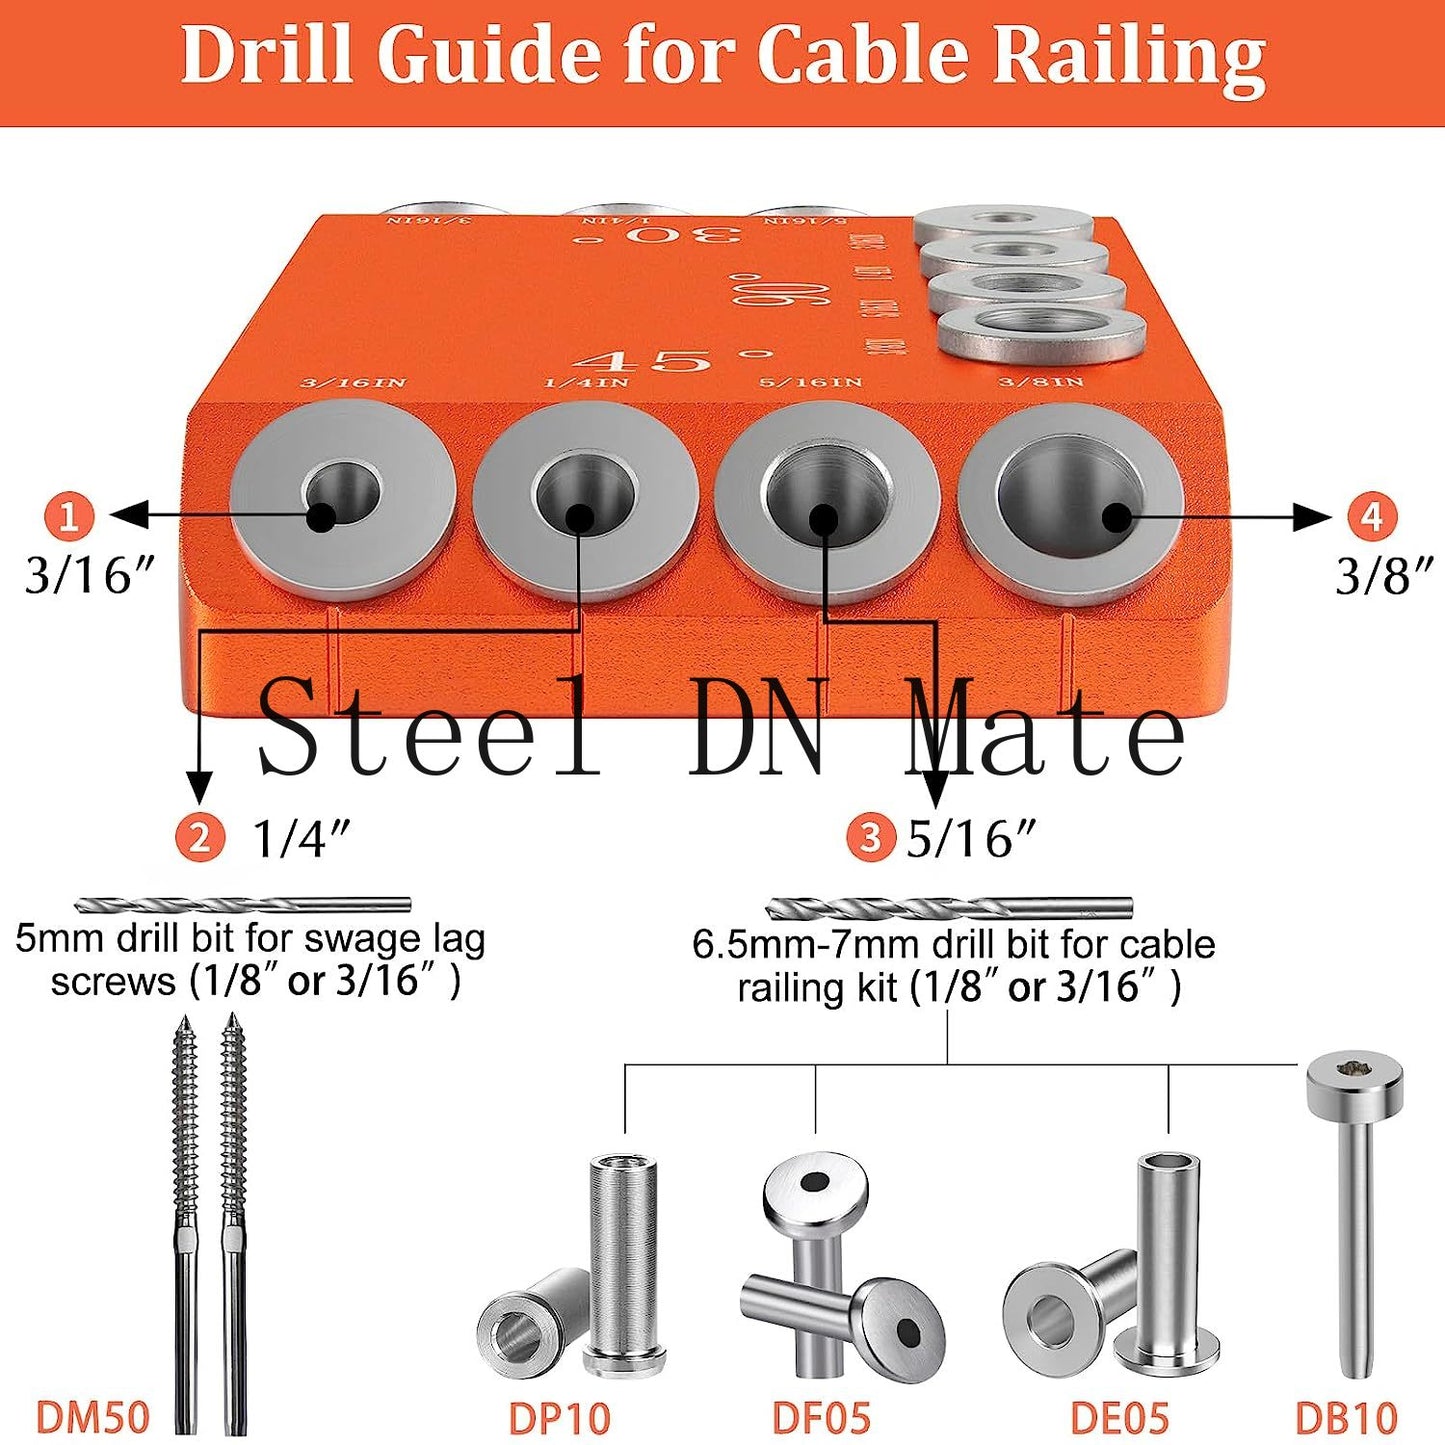 Steel DN Mate 30 45 90 Degree Angle 4 Sizes Drill Hole Guide Jig for Angled and Straight Hole, Portable Deck Cable Railing Lag Screw Drilling Template Block For Horizontal Cable Wood Post Orange